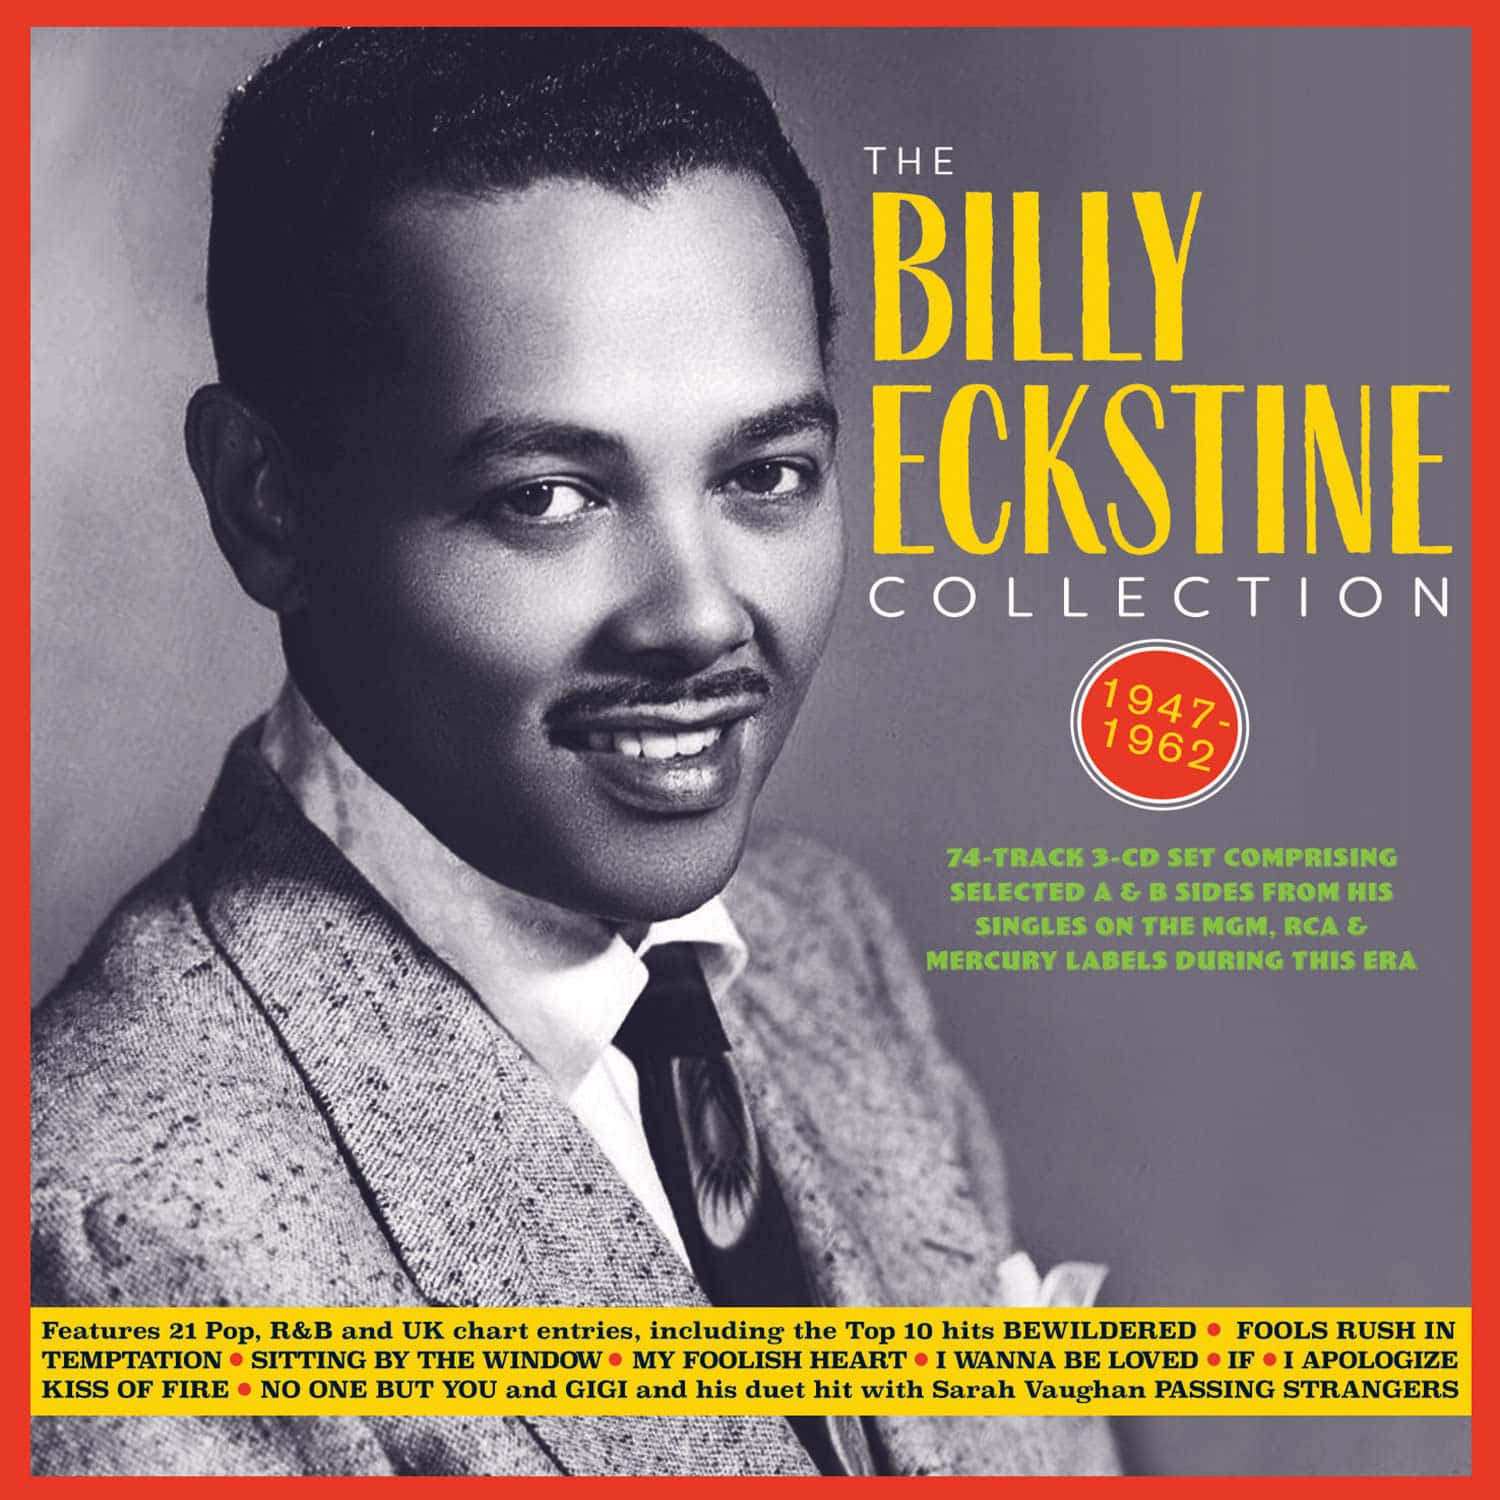 Billy Eckstine Collection Cd Cover Wallpaper